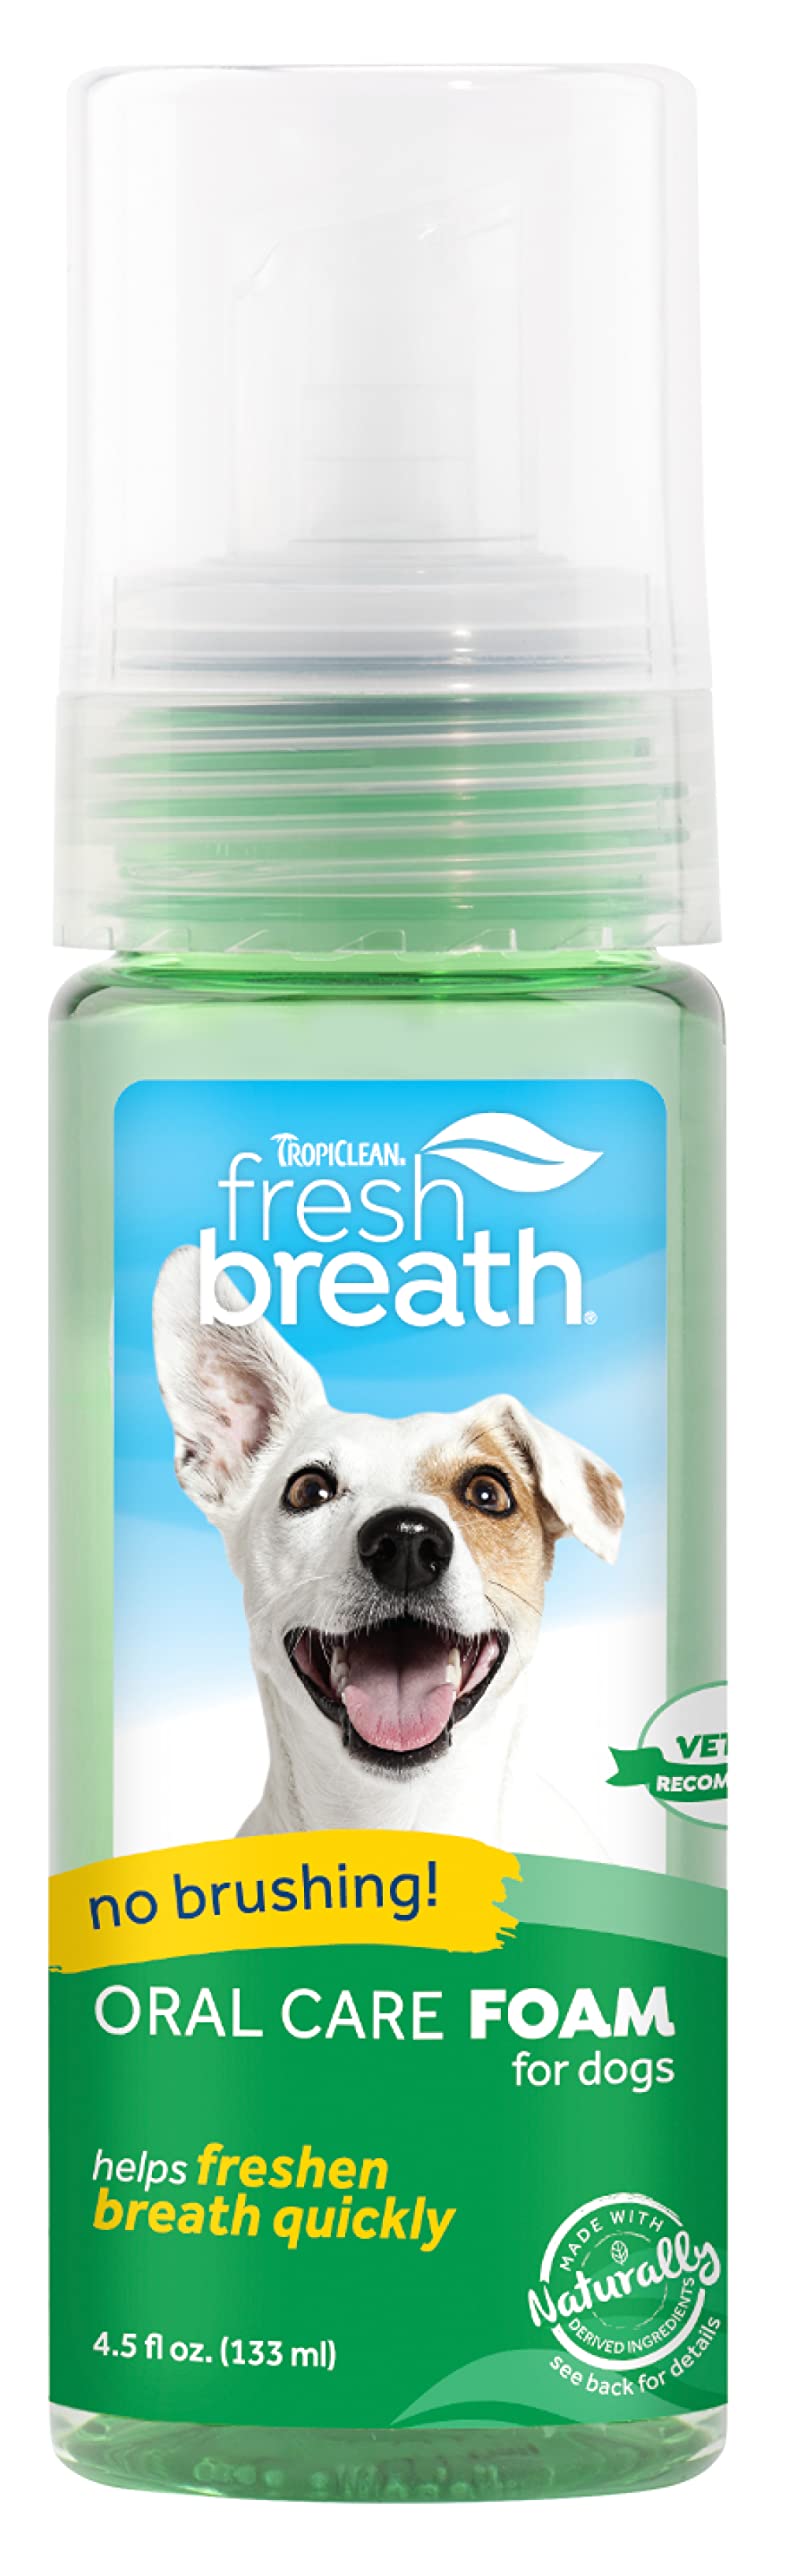 TropiClean Fresh Breath Dog Teeth Cleaning Foam - Dental Care Solution - Breath Freshener Oral Care - Foam for Bad, Smelly Dog Breath - Derived from Natural Ingredients, Mint, 4.5oz - PawsPlanet Australia